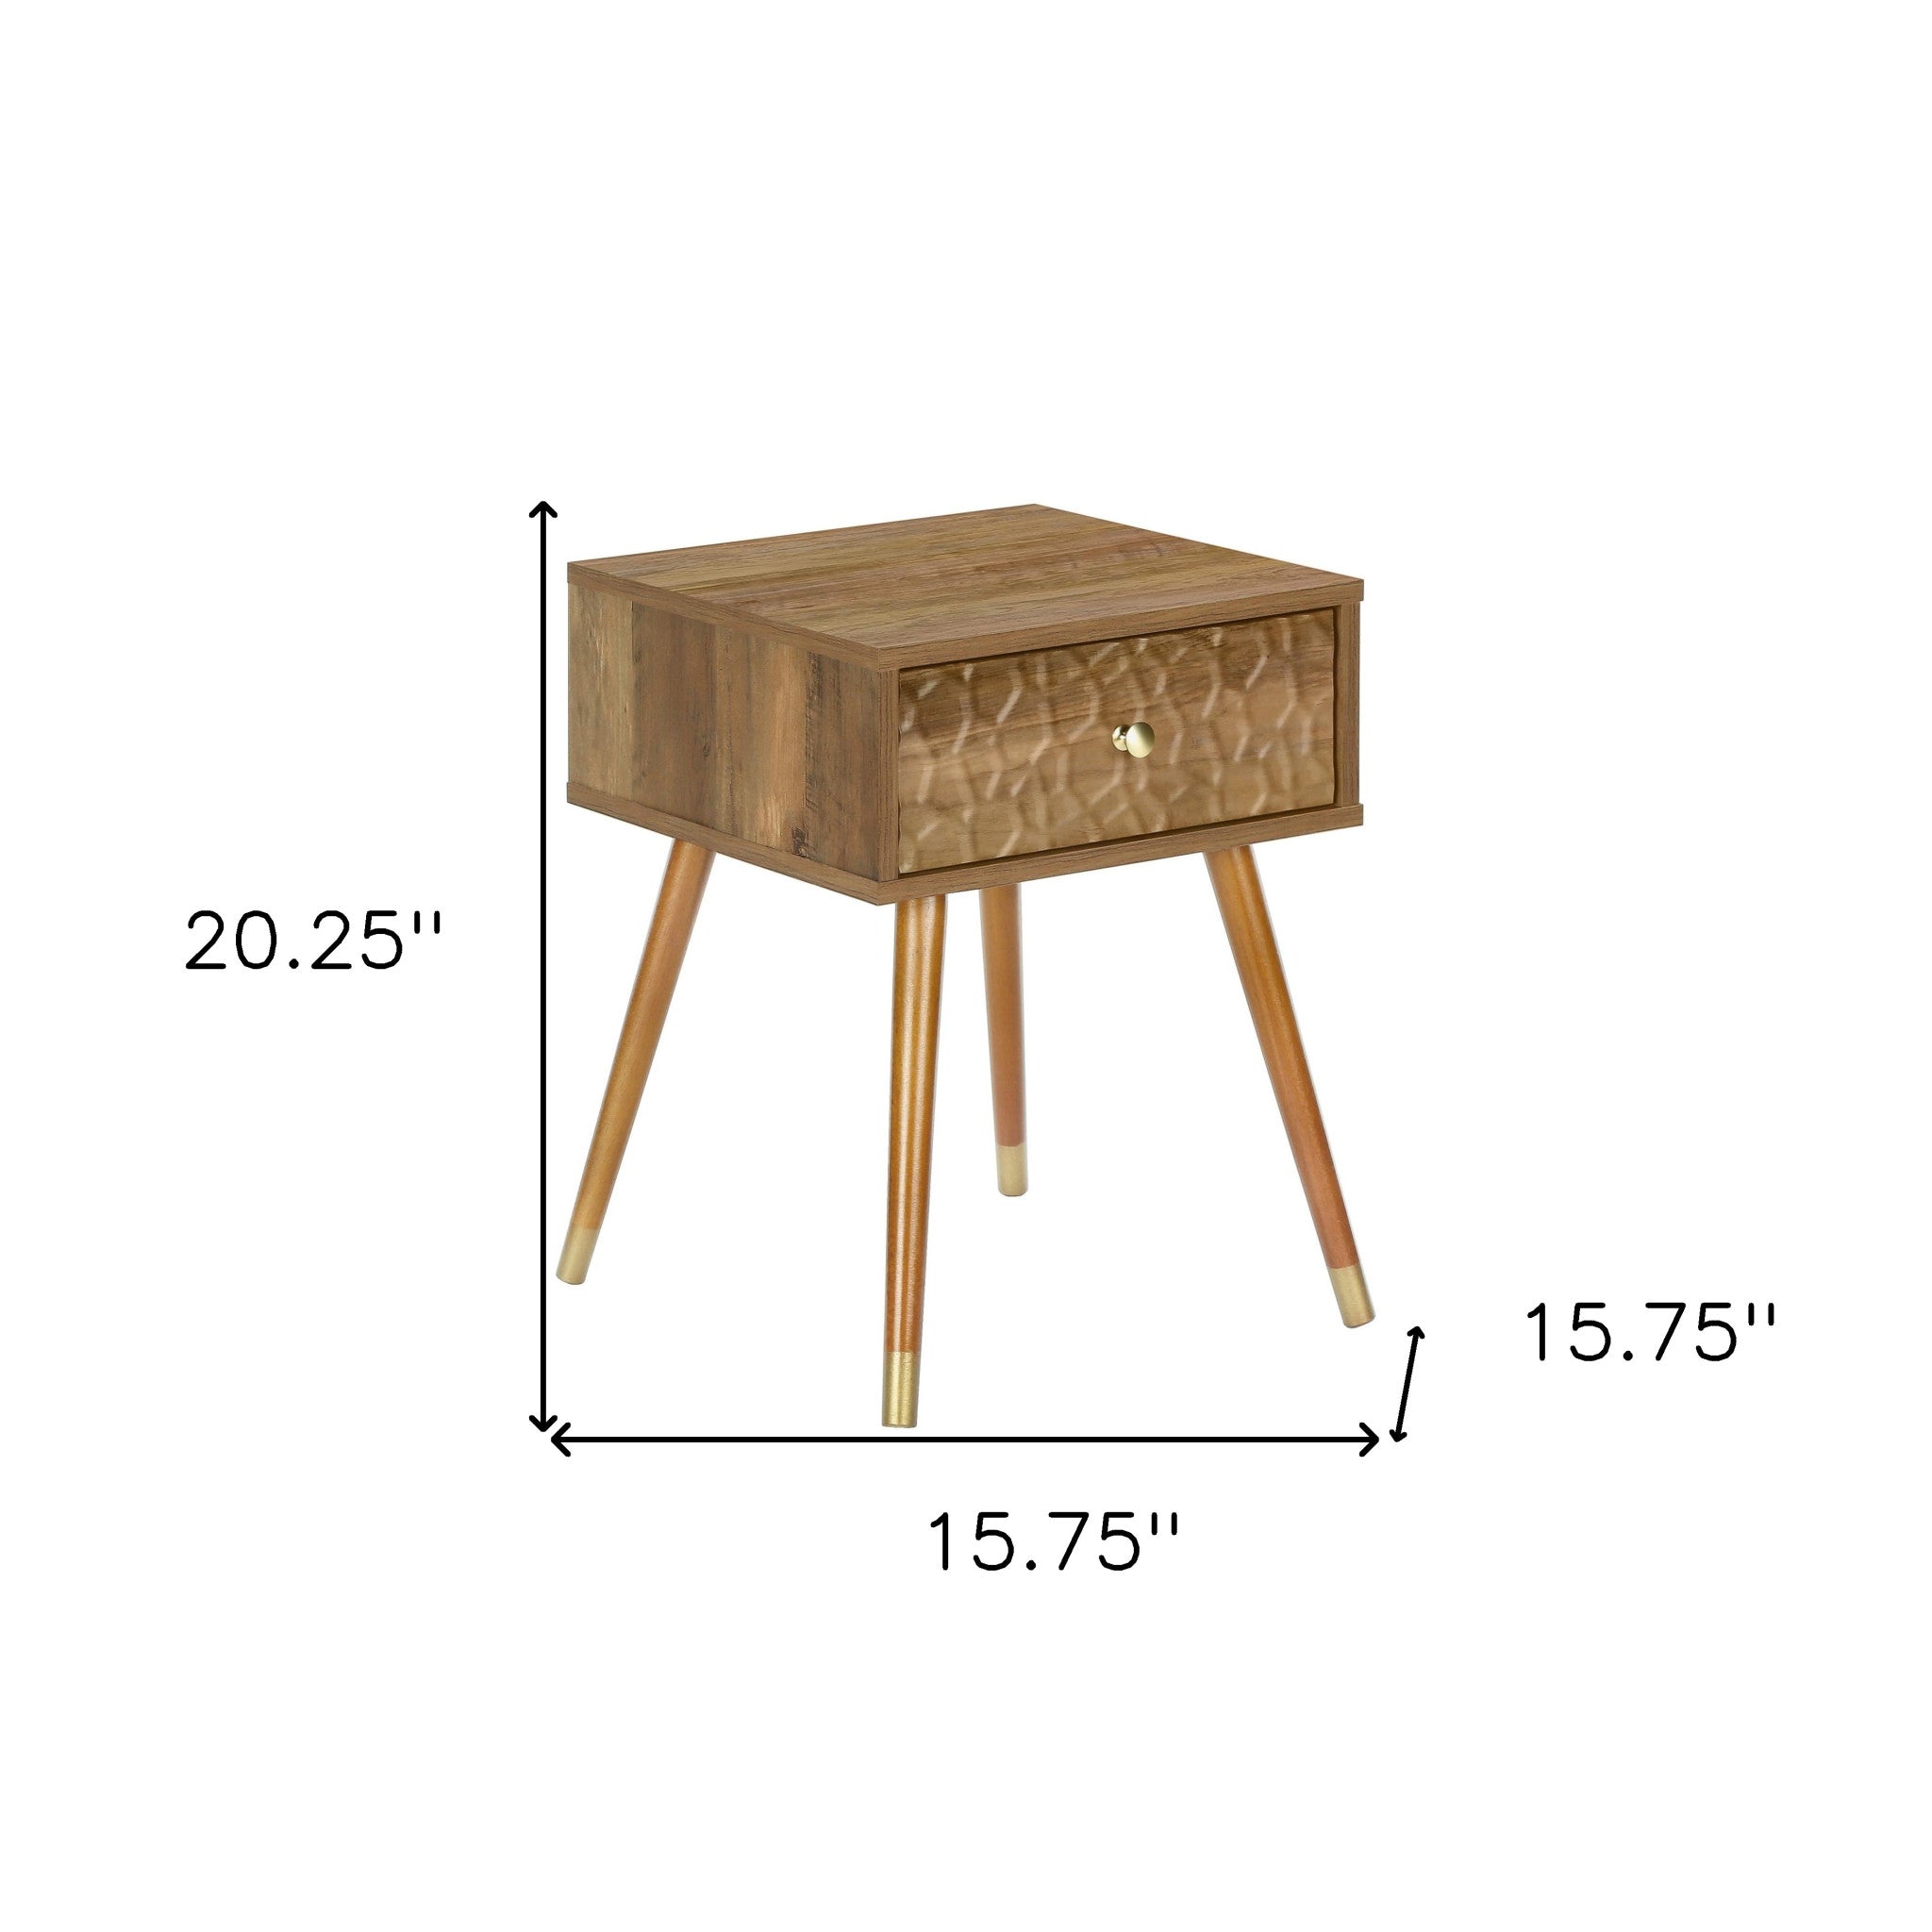 20" Walnut End Table With Drawer